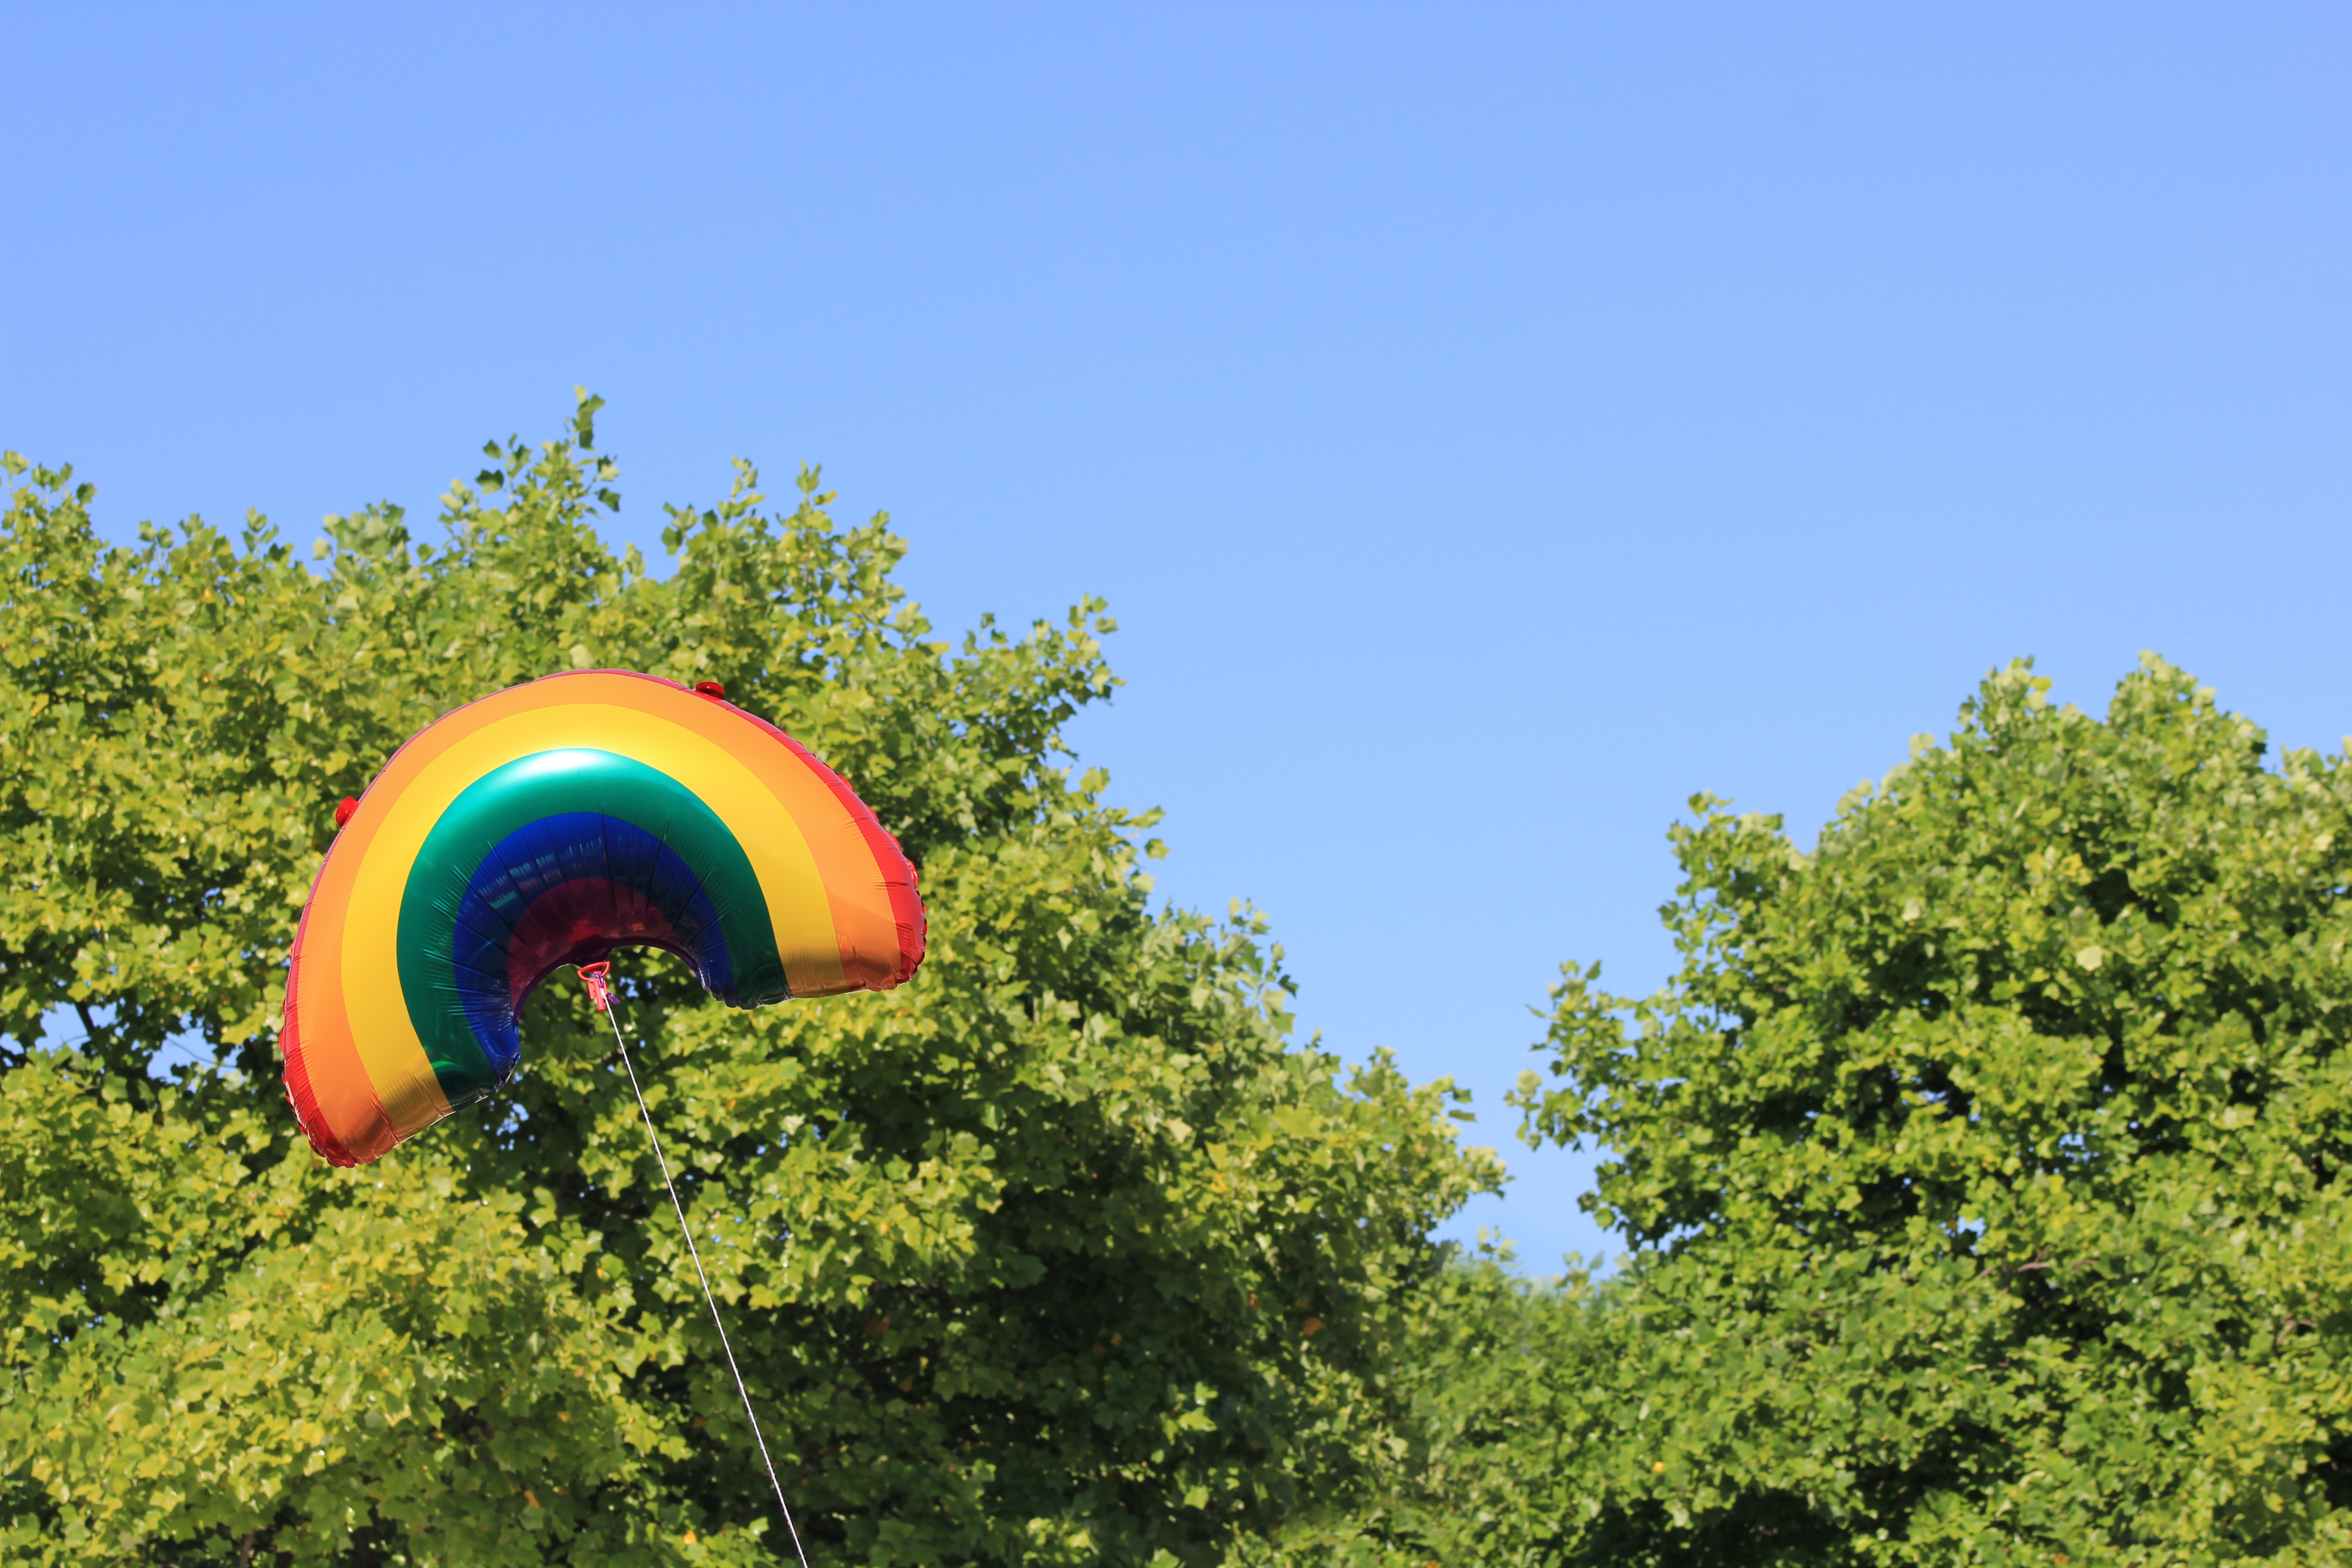 A multi-coloure drainbow shaped kite floating above the heads of the happy party goers below at Bristol pride festival. Photographer: Robin Worrall.